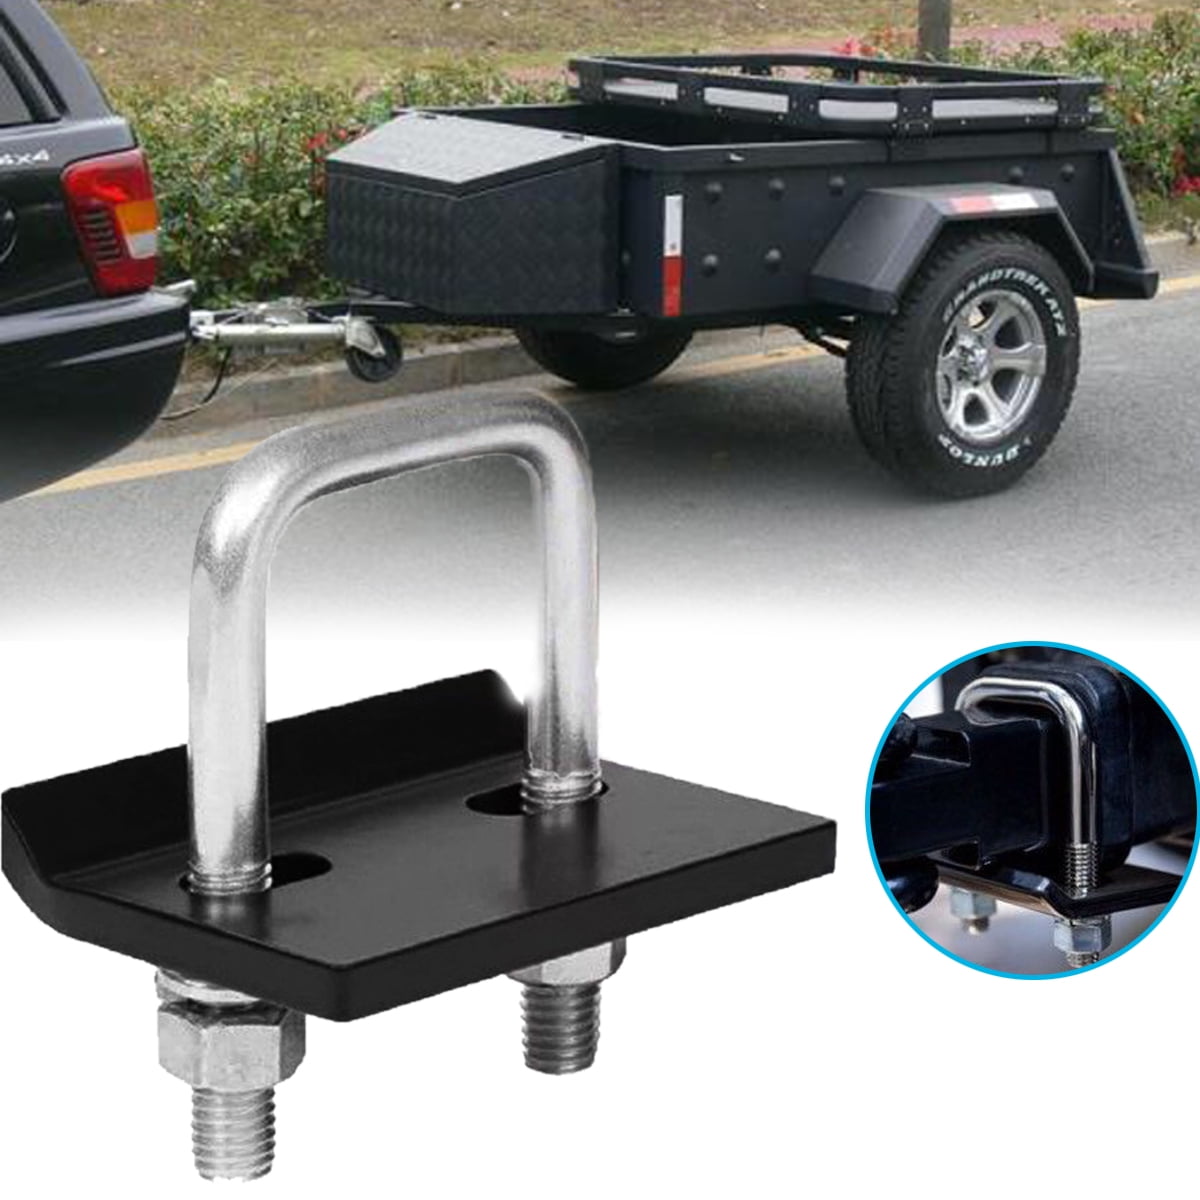 Complete Set Rv Bumper Hitch Receiver 2 inch with Anti Rattle Hitch Tightener for 4x4 inch Bumper Bars Trailer Towing Cargo Carrier Bike Racks BBQ Grill Carrier Campers Camping 3500 lbs 